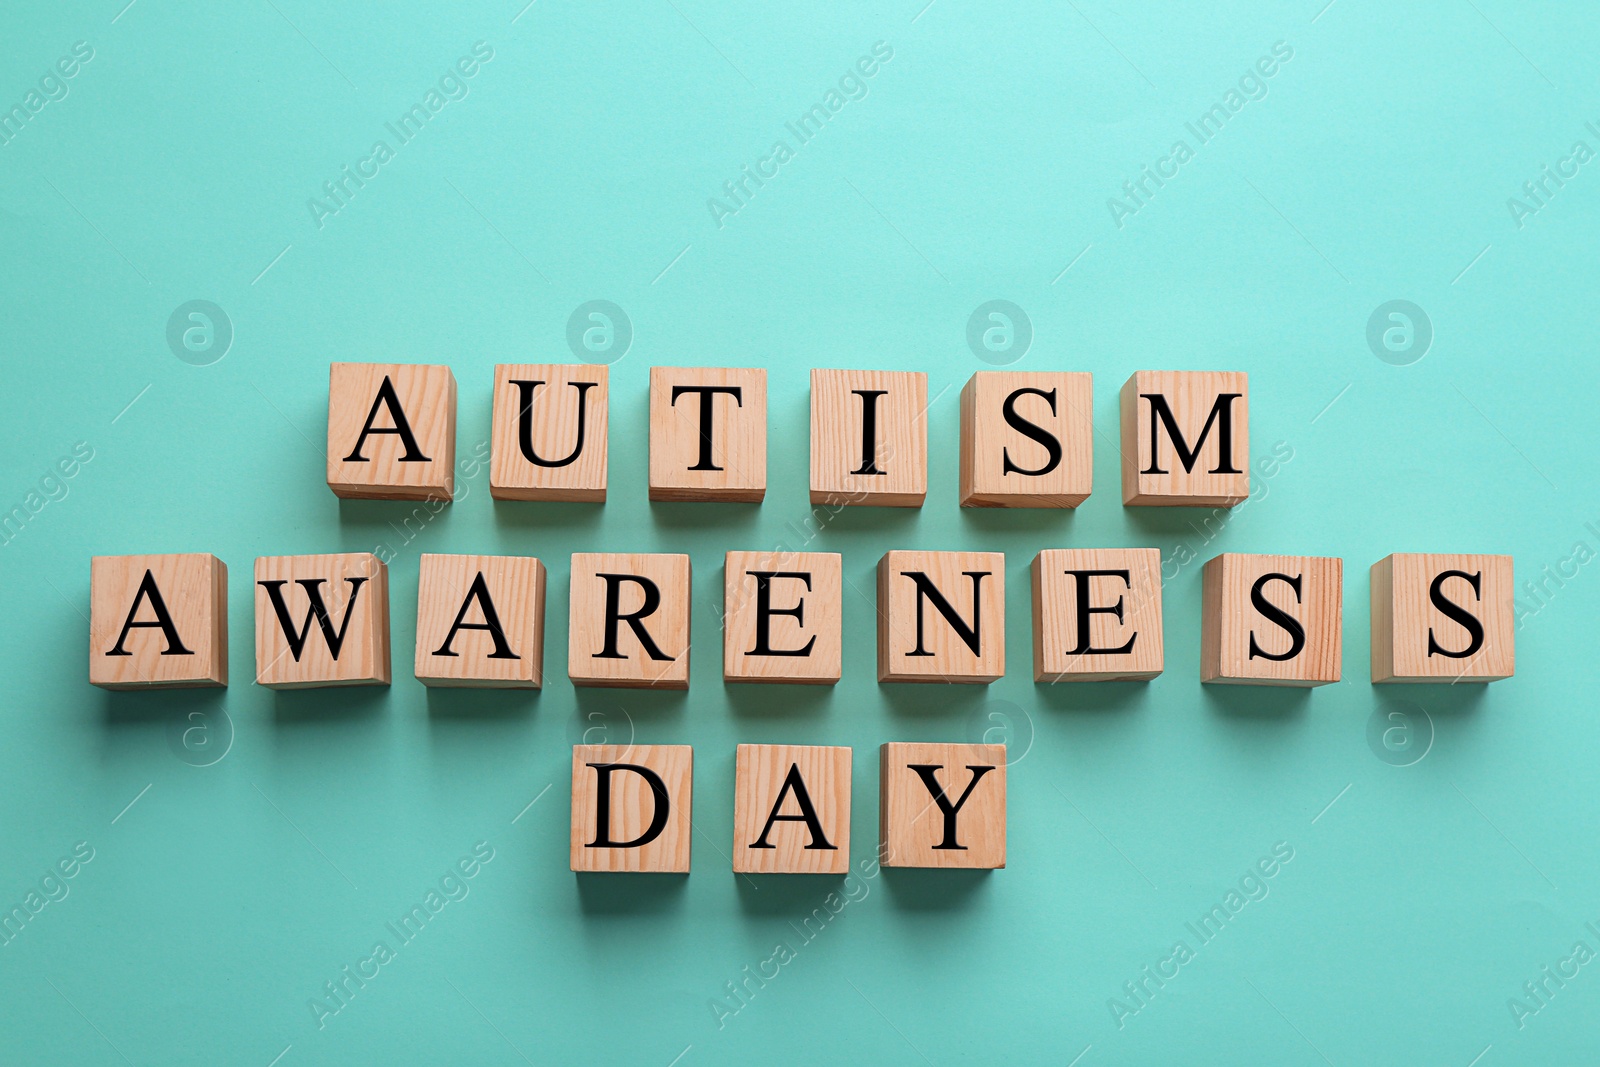 Photo of Cubes with phrase "Autism awareness day" on color background